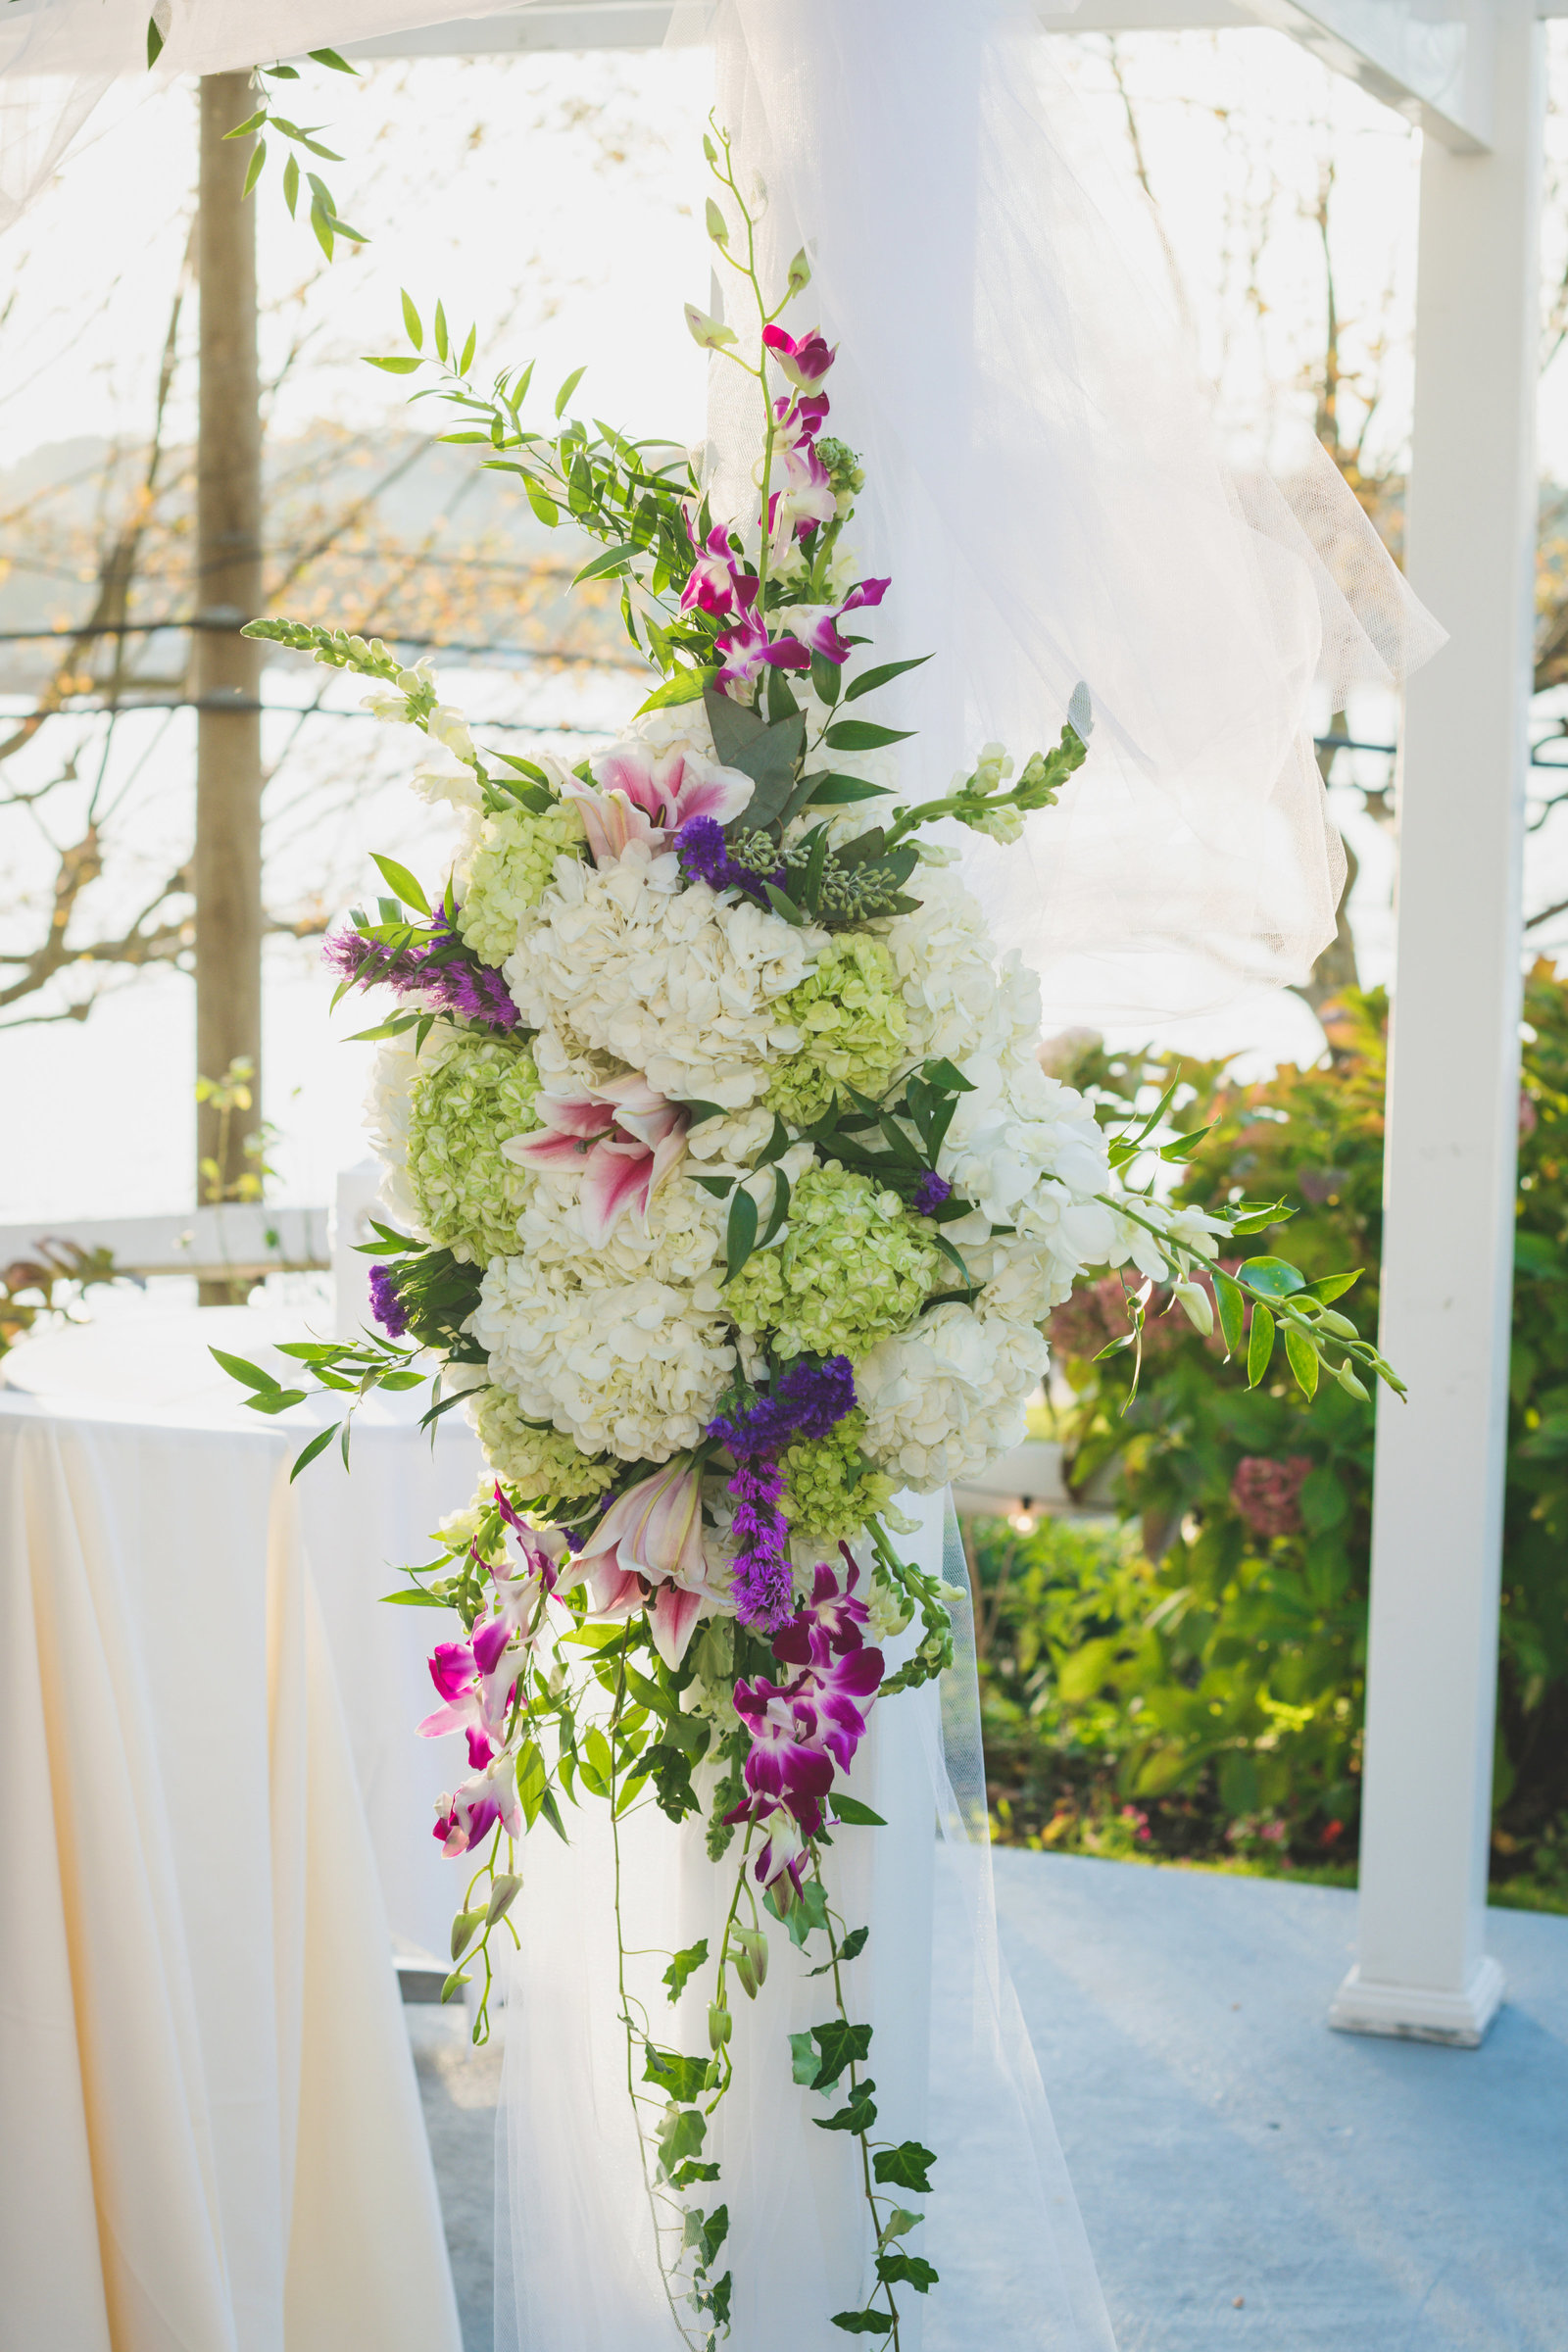 photo of flower decor from wedding ceremony at Sea Cliff Manor